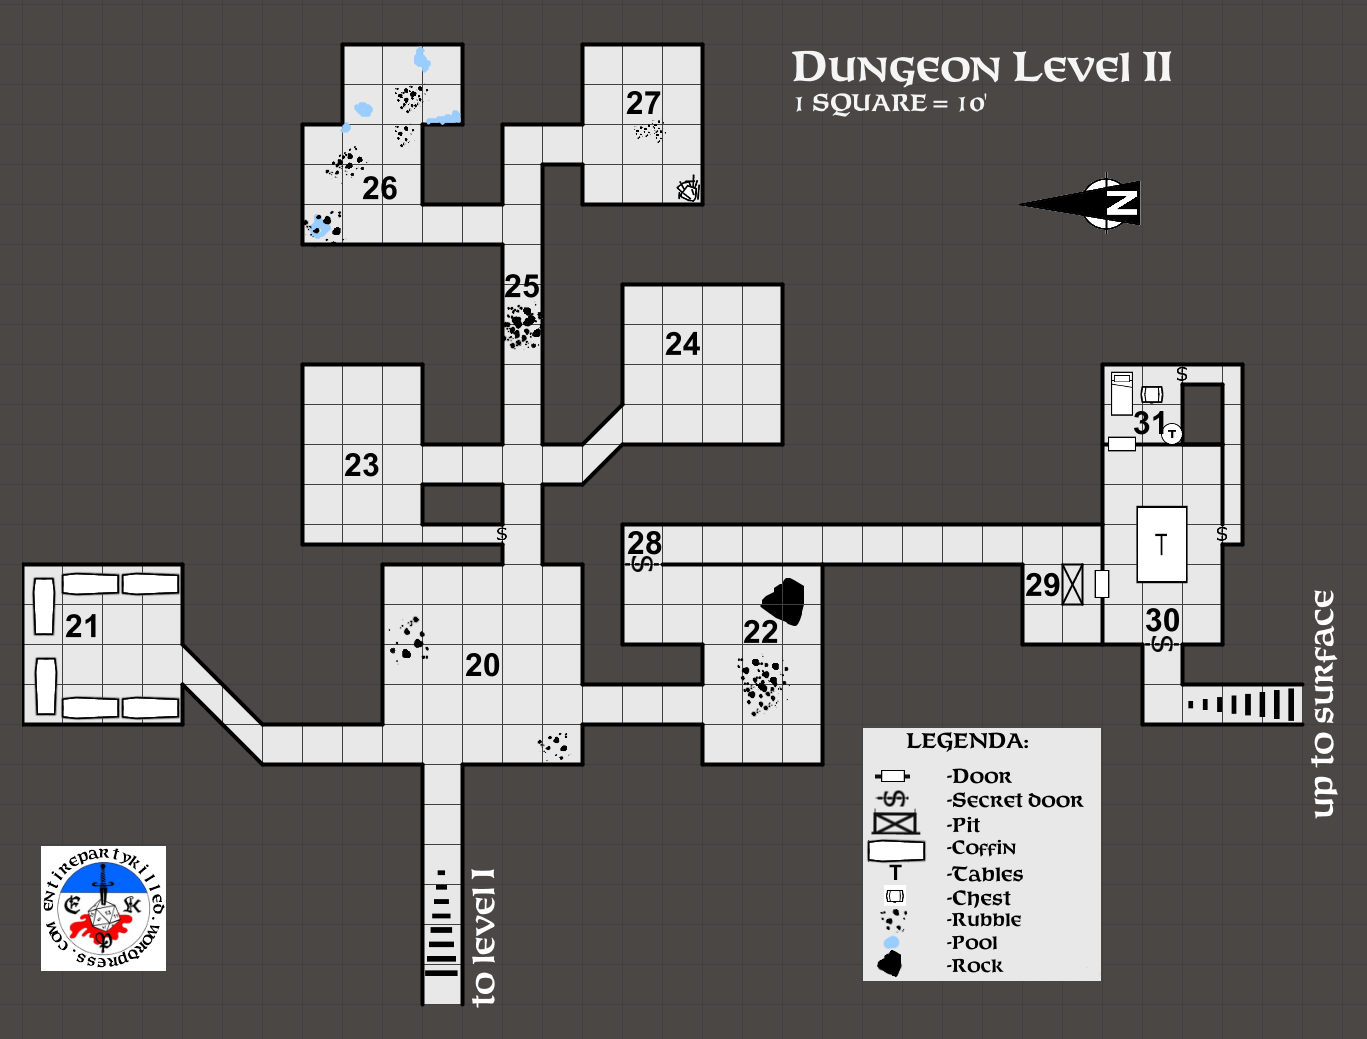 b11-dungeon-map-2.png